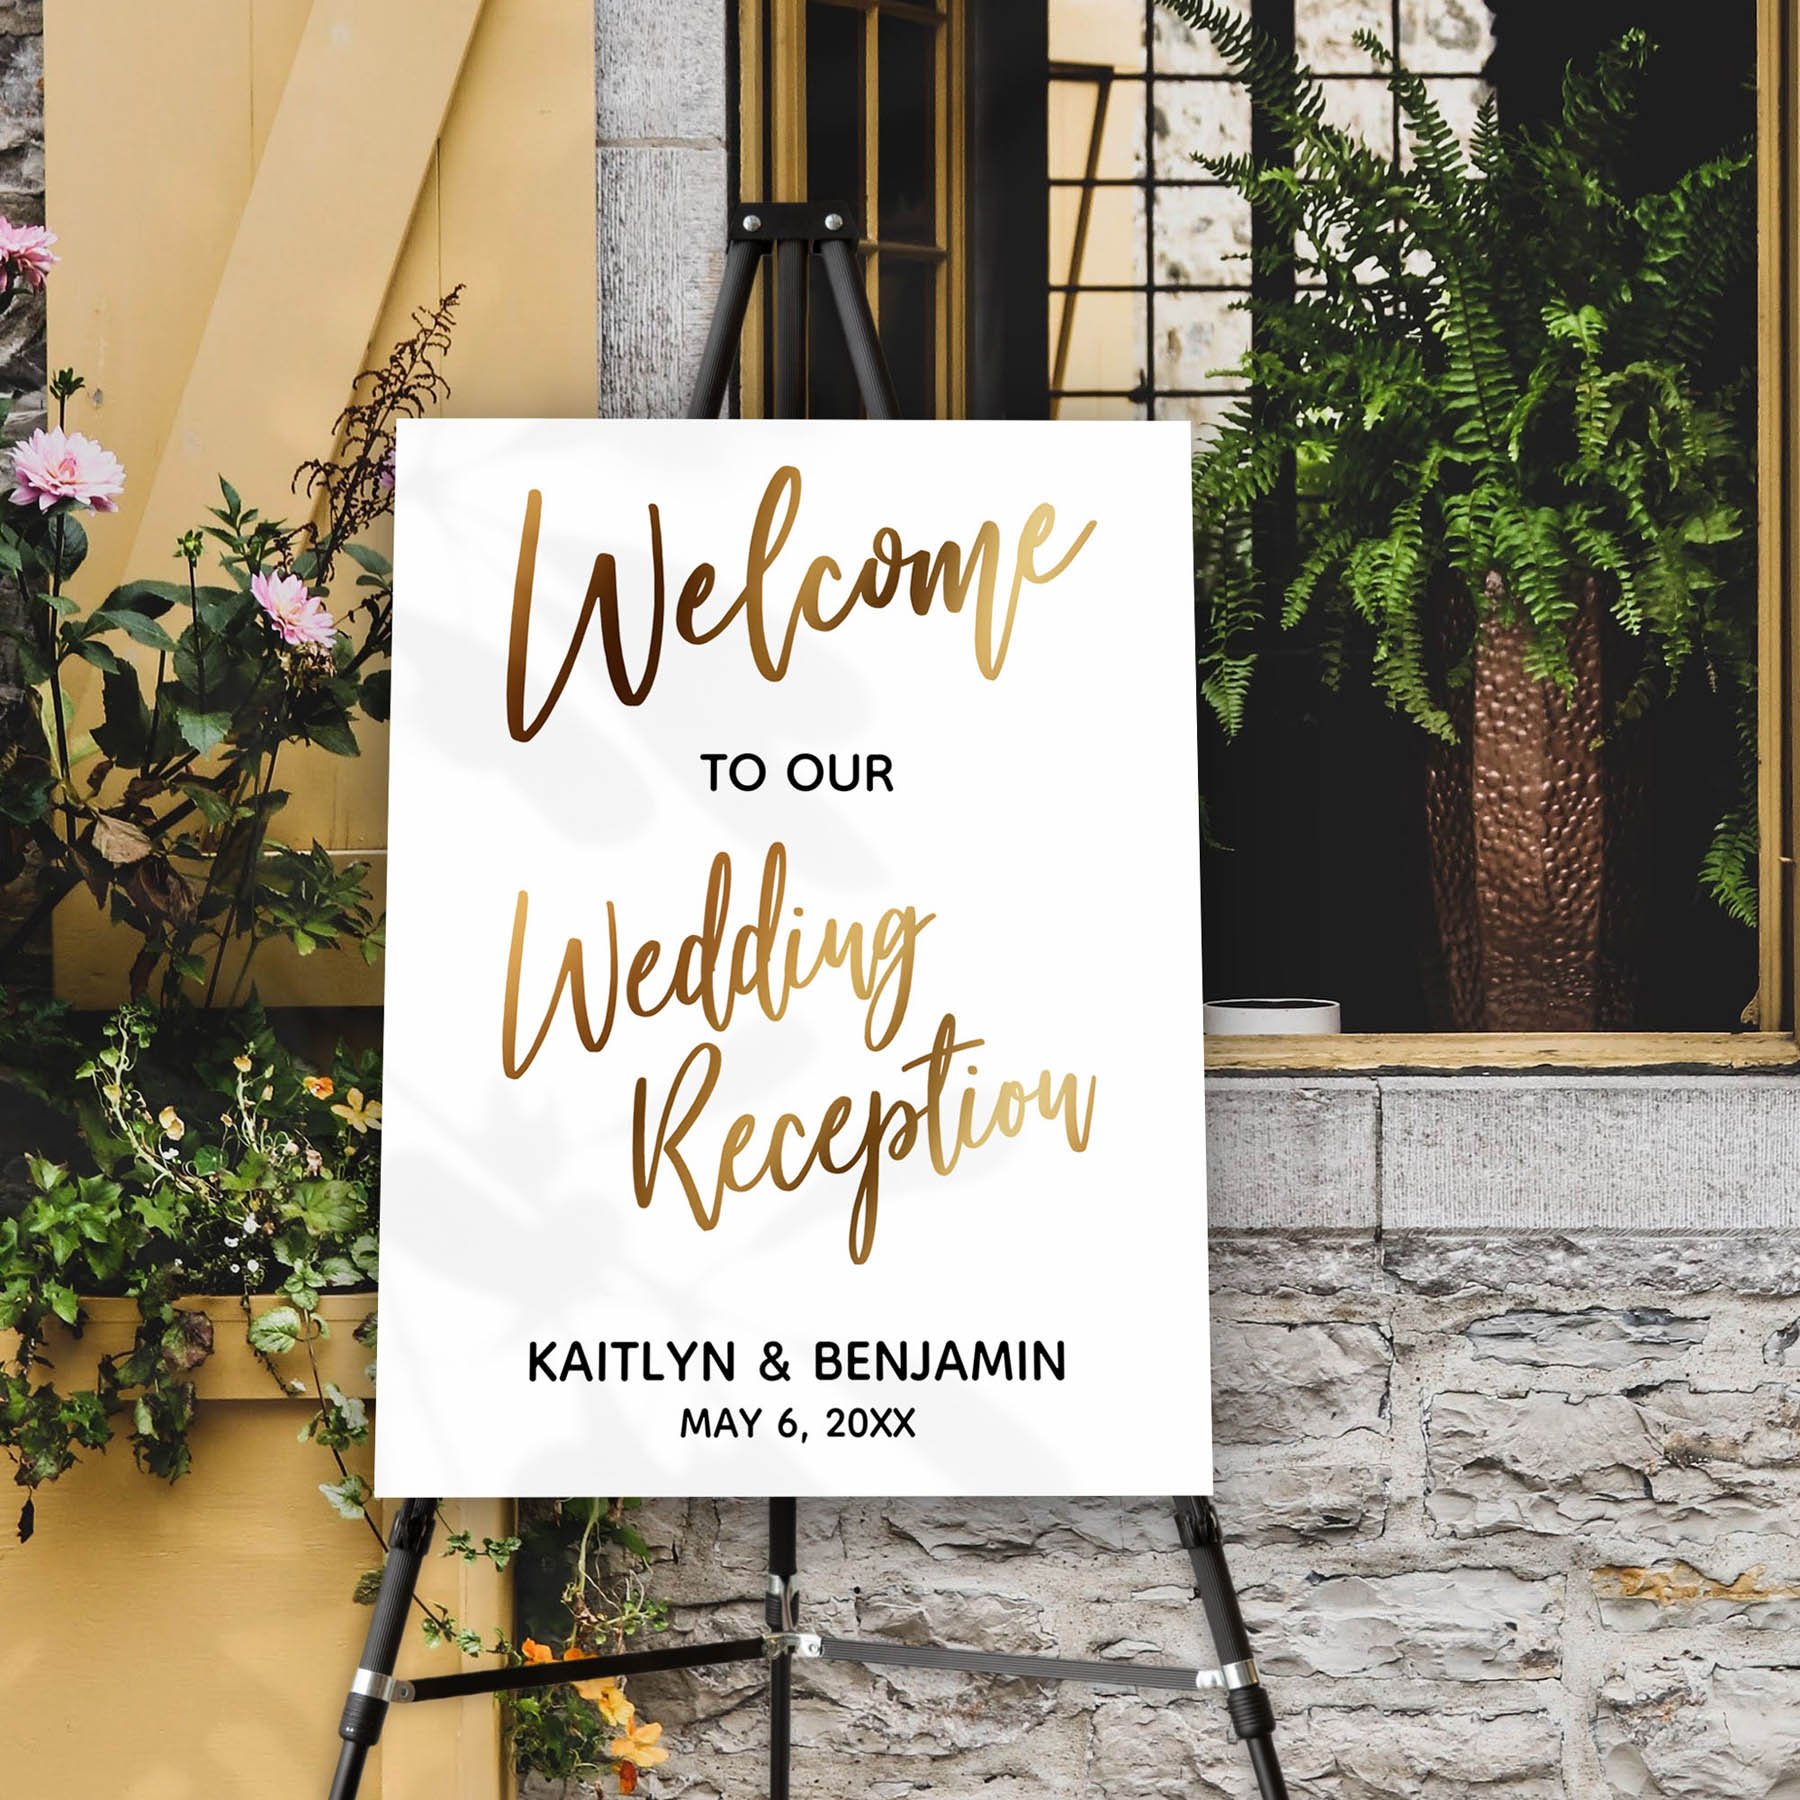 wedding_reception_welcome-sign-faux-gold-typography-256382385627841426.jpg